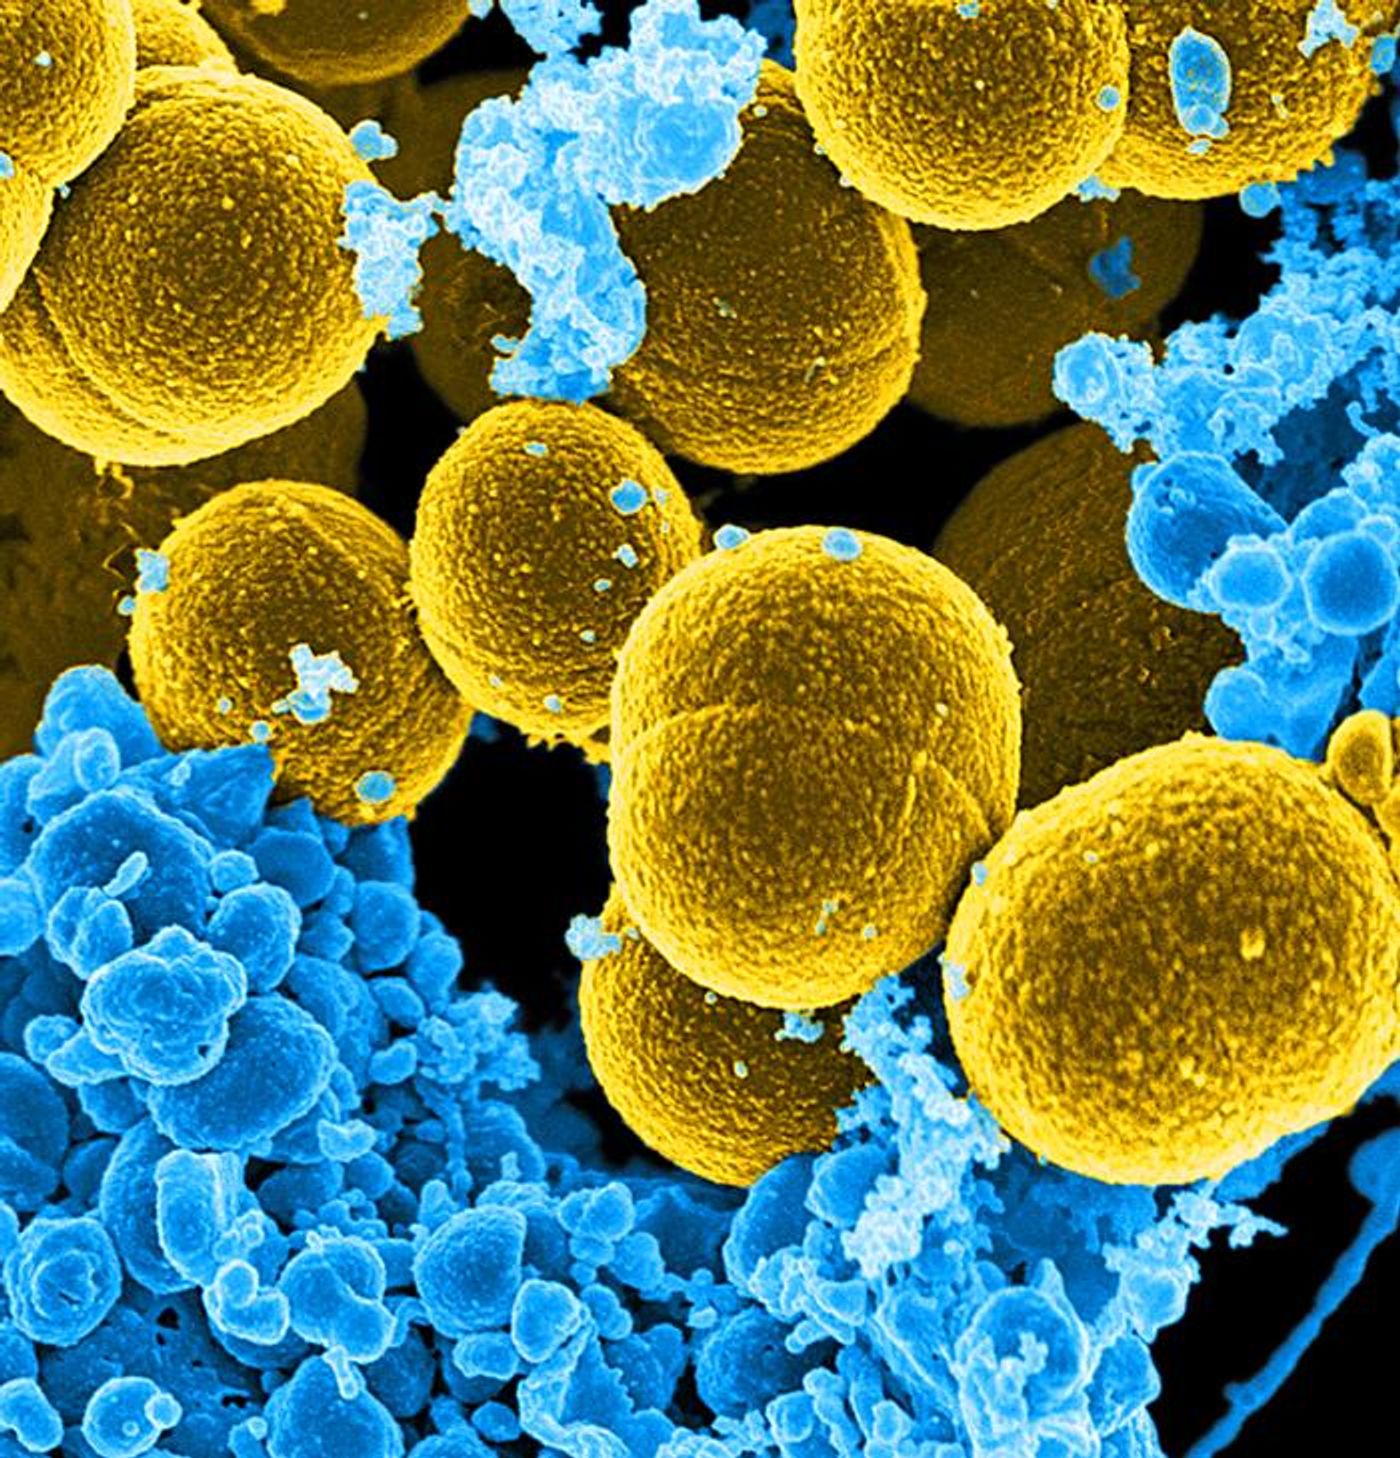 A digitally colorized, SEM image, (20,000X) depicting mustard-colored Staphylococcus aureus bacteria in the process of attempting to escape their destruction by blue-colored, human white blood cells. / Credit: National Institute of Allergy and Infectious Diseases (NIAID) / Photo Credit: Frank DeLeo, NIAID